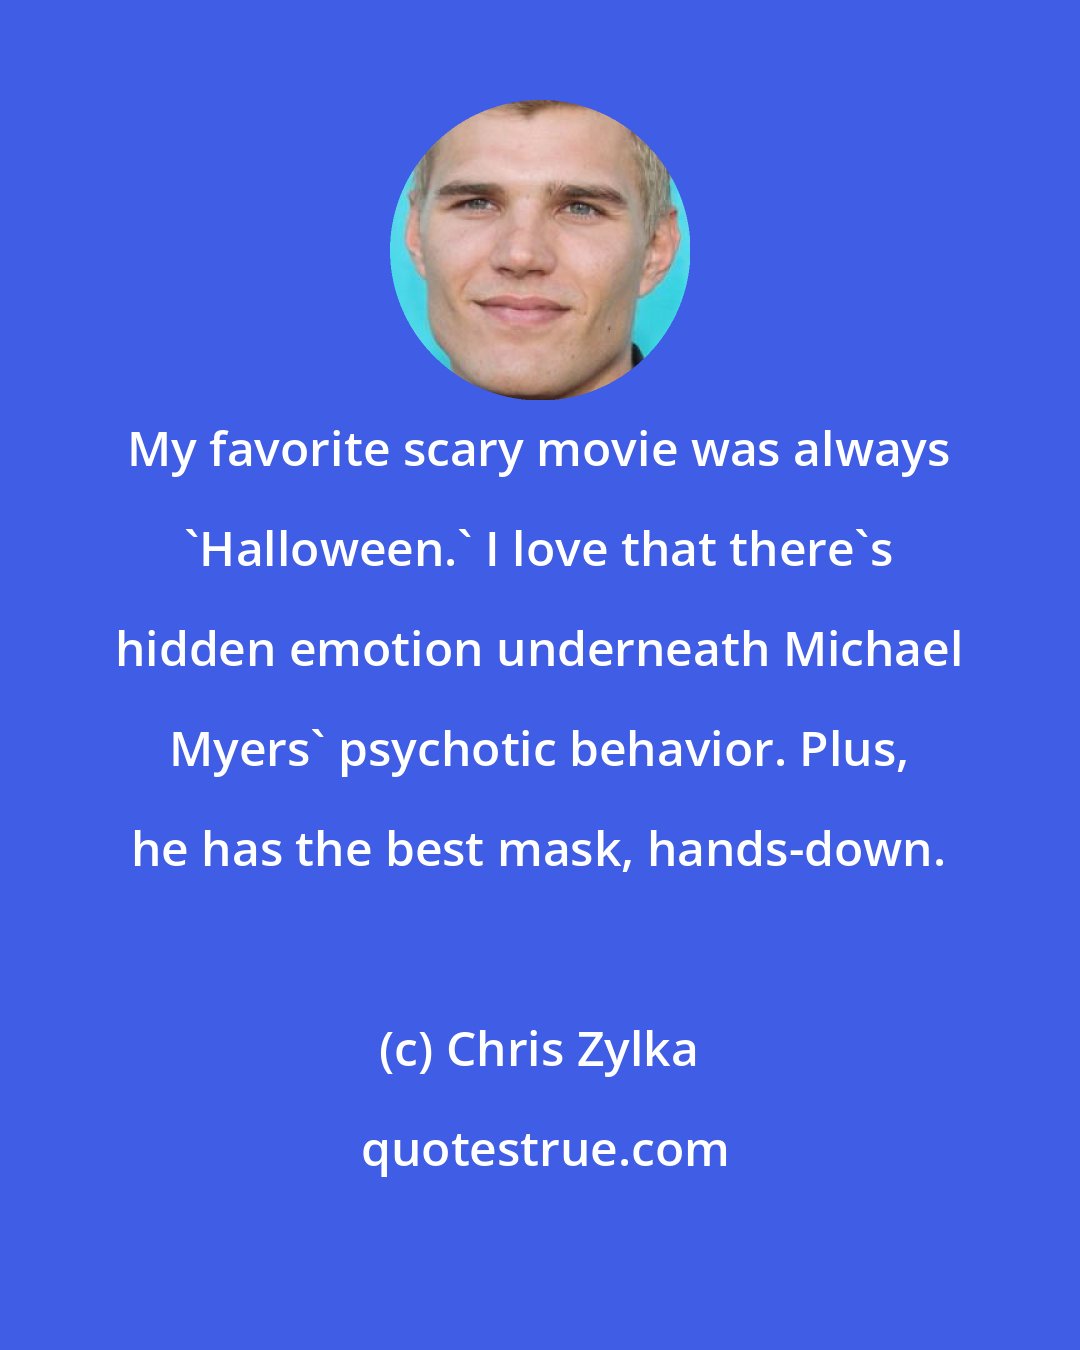 Chris Zylka: My favorite scary movie was always 'Halloween.' I love that there's hidden emotion underneath Michael Myers' psychotic behavior. Plus, he has the best mask, hands-down.